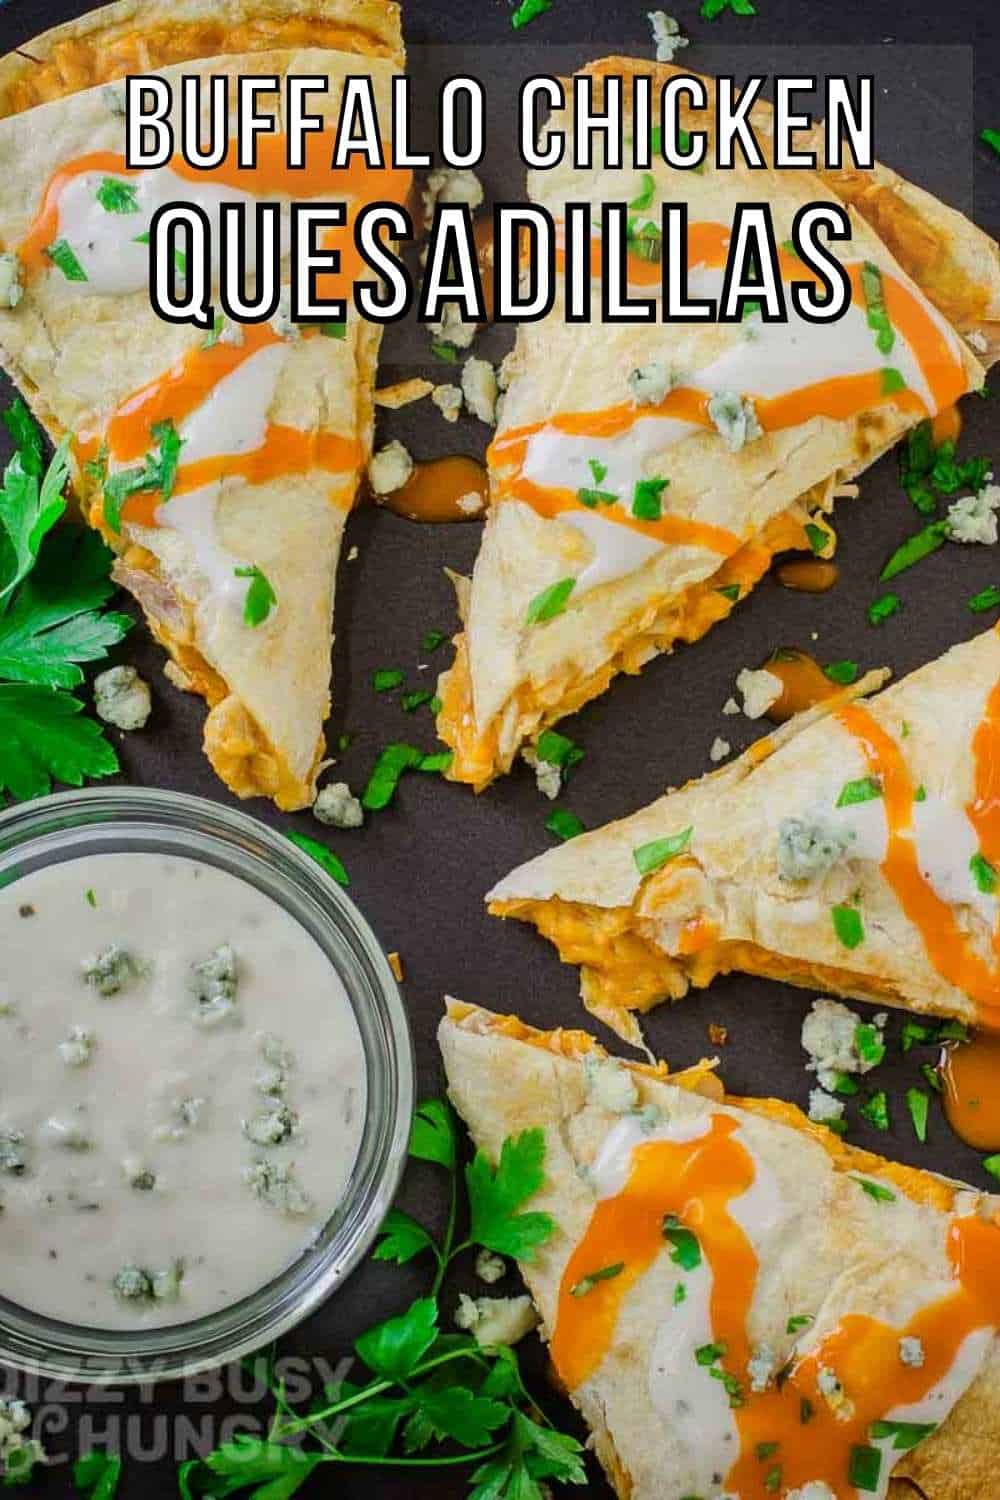 Overhead shot of a cut quesadilla drizzled with buffalo sauce and blue cheese garnished with herbs on a black plate with a side of ranch in a white bowl.